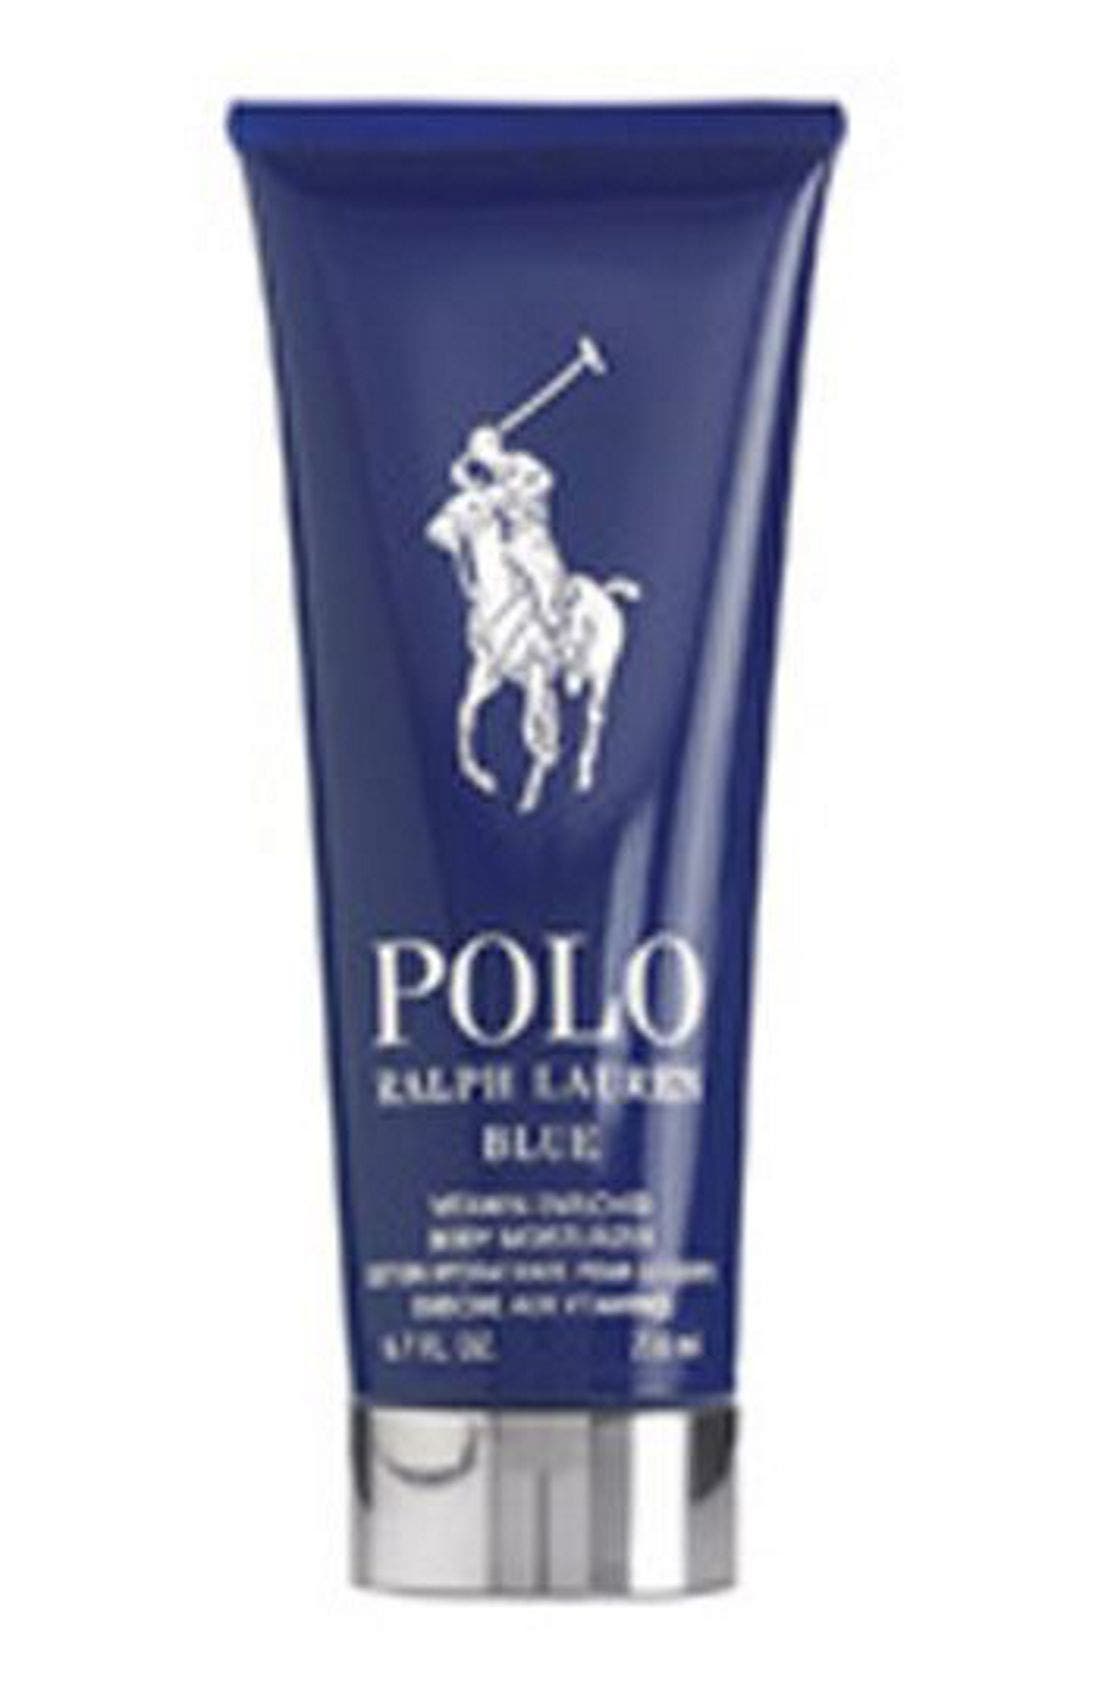 polo blue aftershave lotion